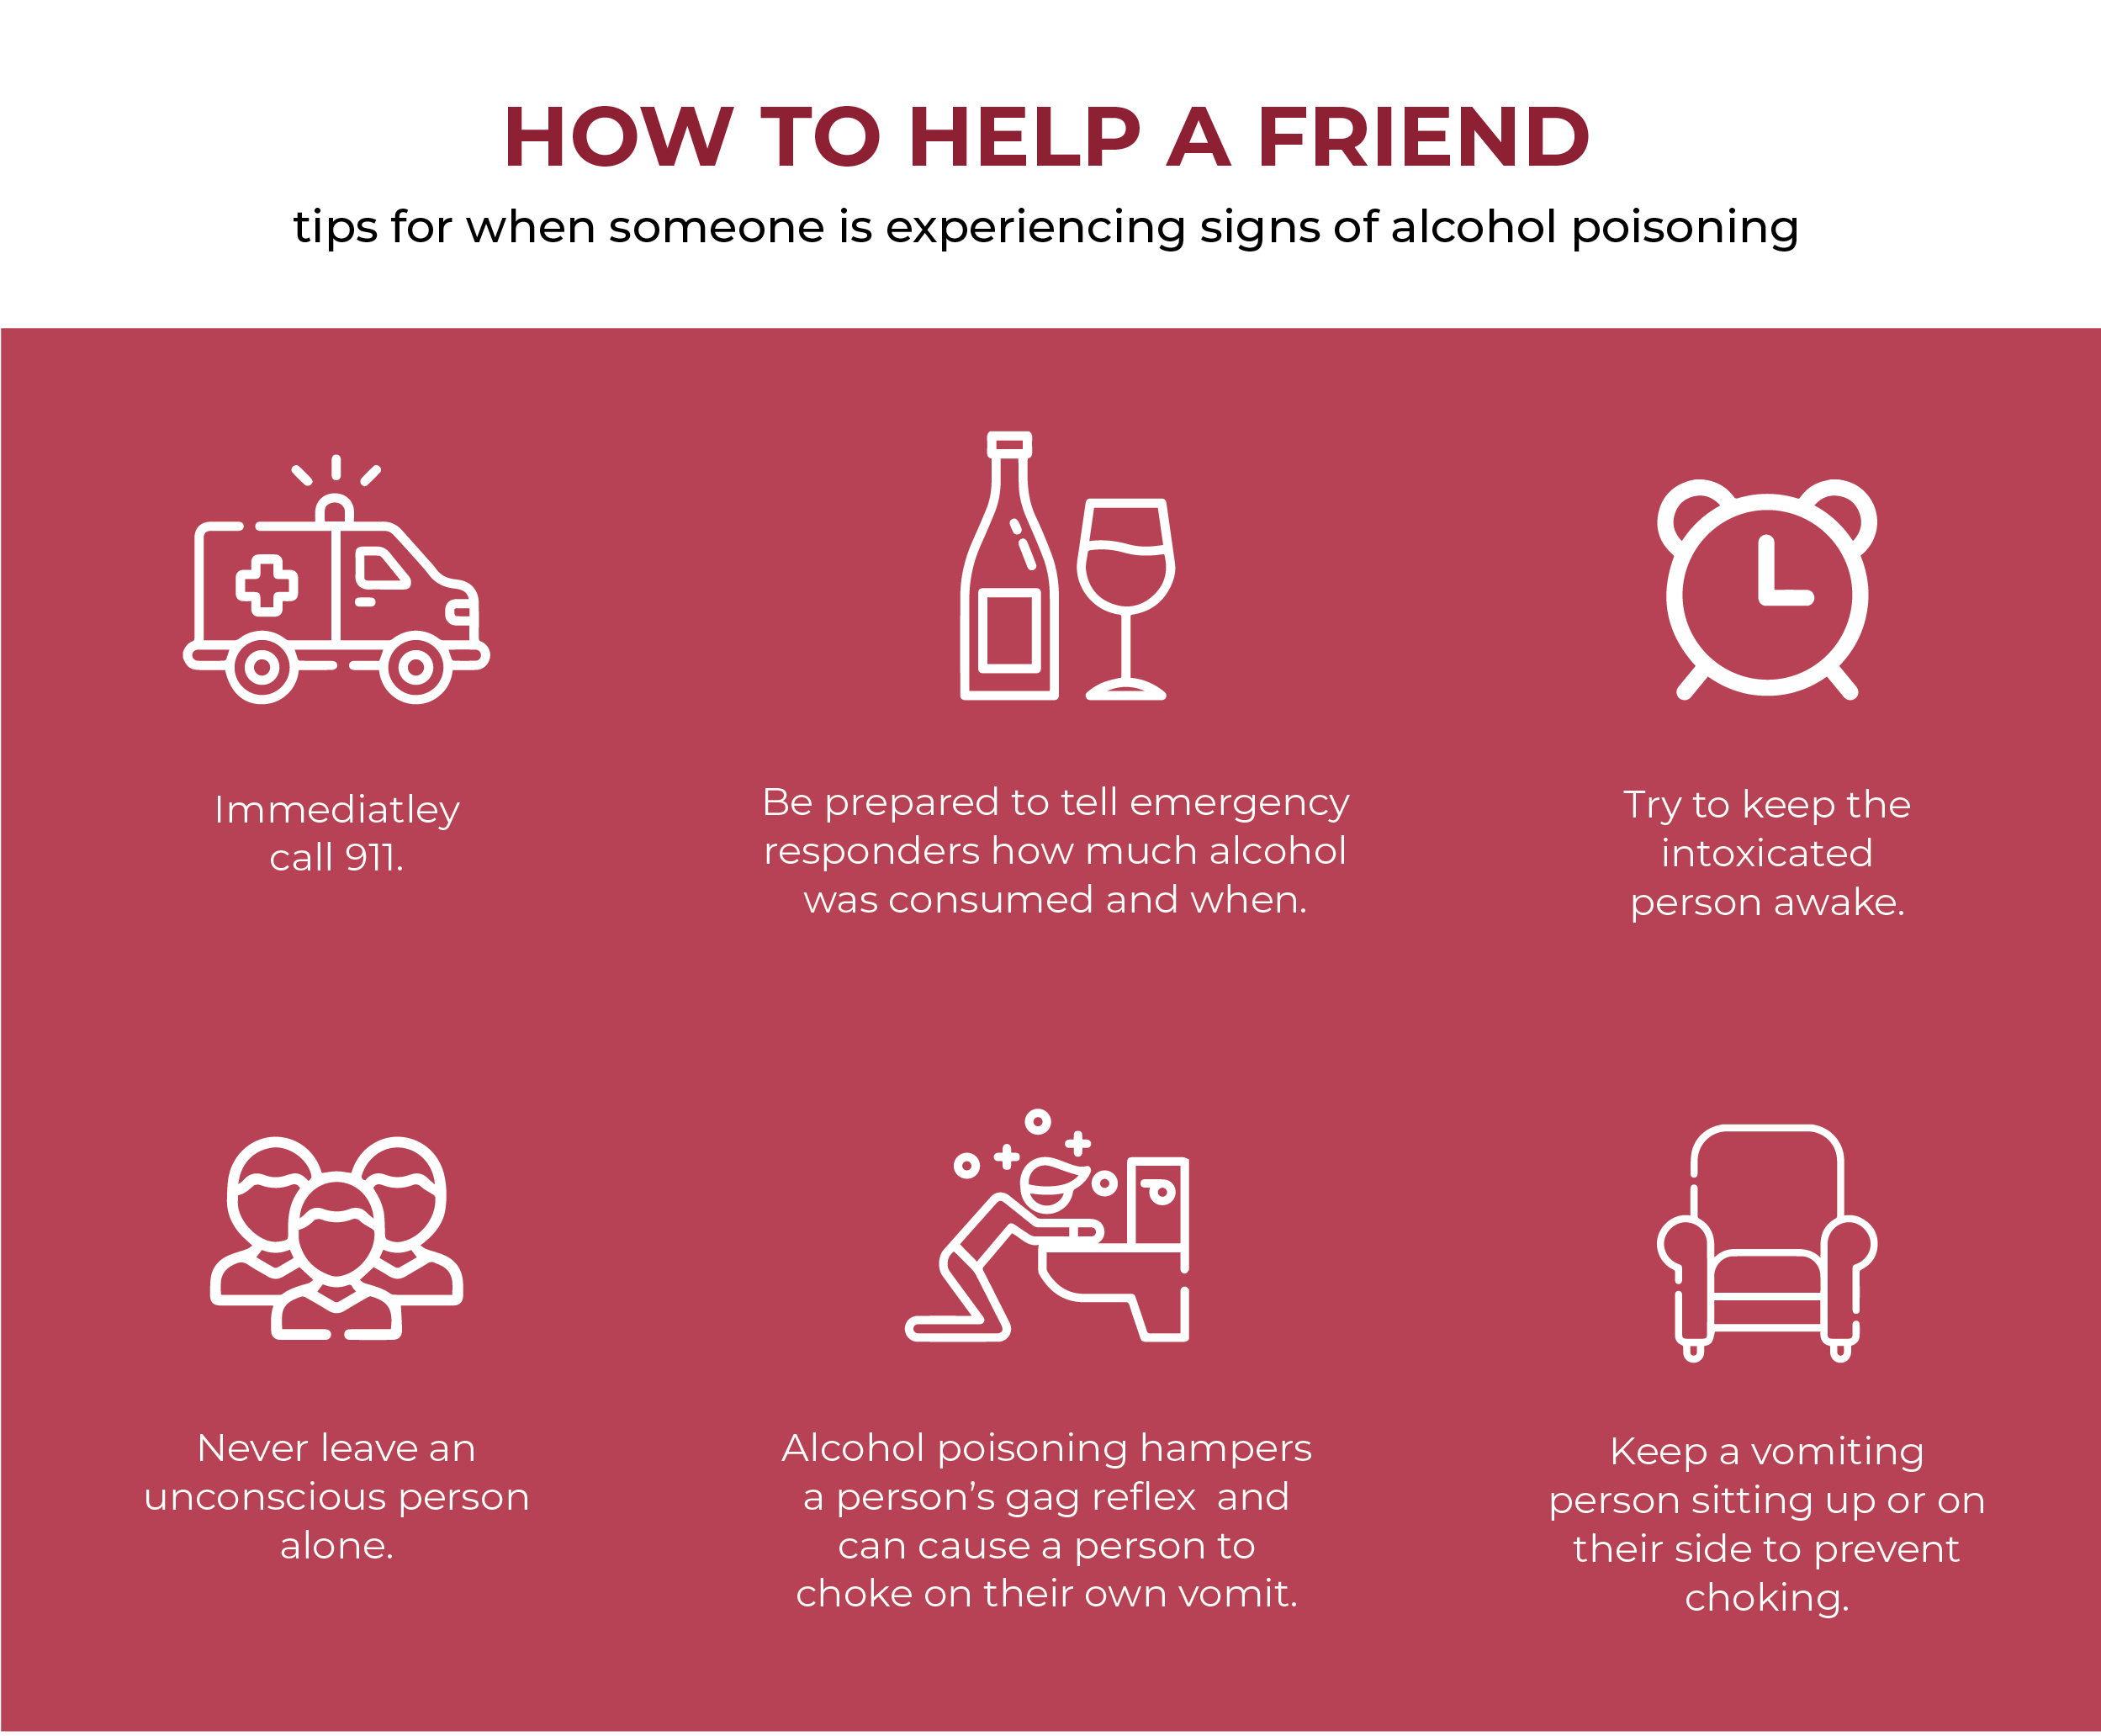 ways to help a friend who is experiencing alcohol poisoning, including staying with them, laying them on their side, and calling 911 immediately.